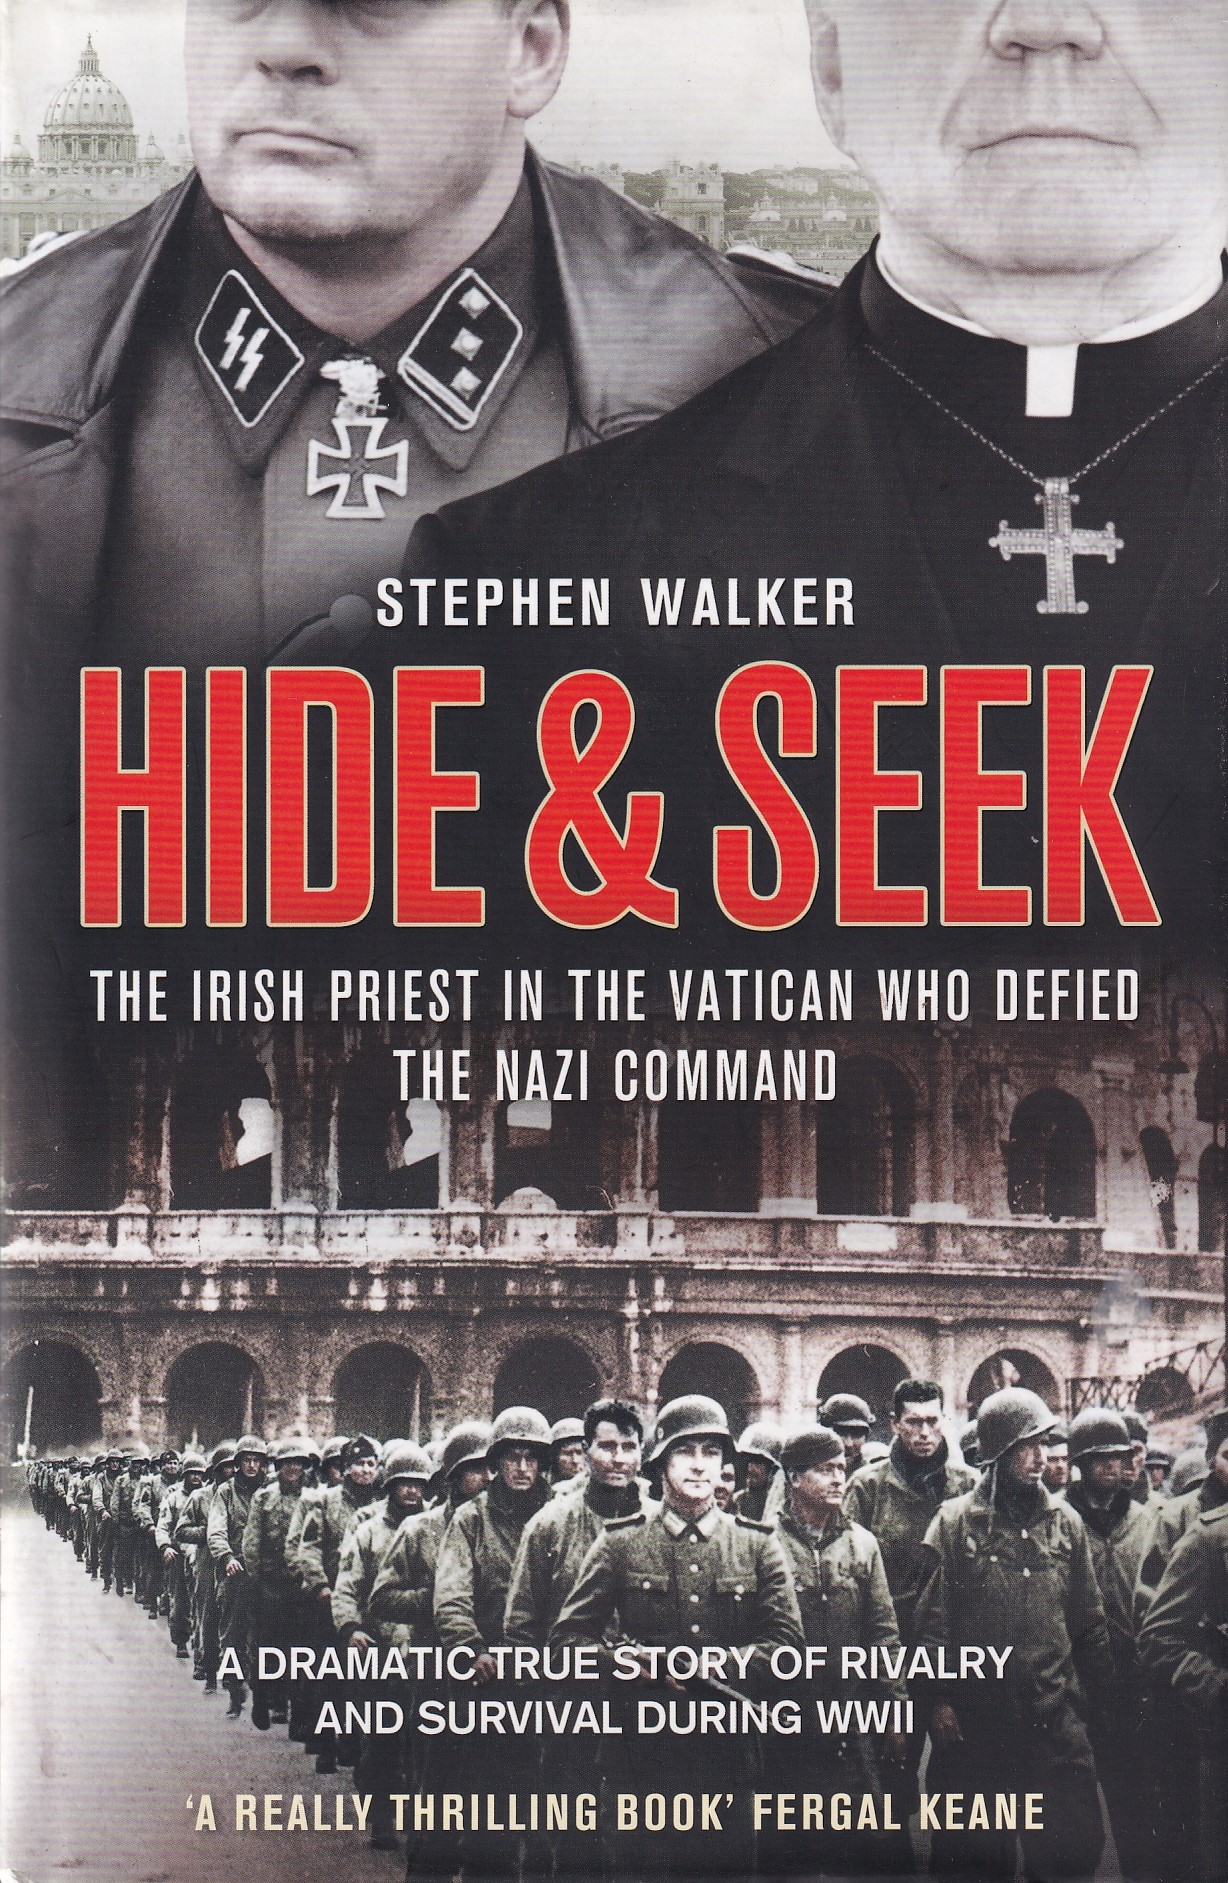 Hide and Seek: The Irish Priest in the Vatican who Defied the Nazi Command. The dramatic true story of rivalry and survival during WWII | Stephen Walker | Charlie Byrne's